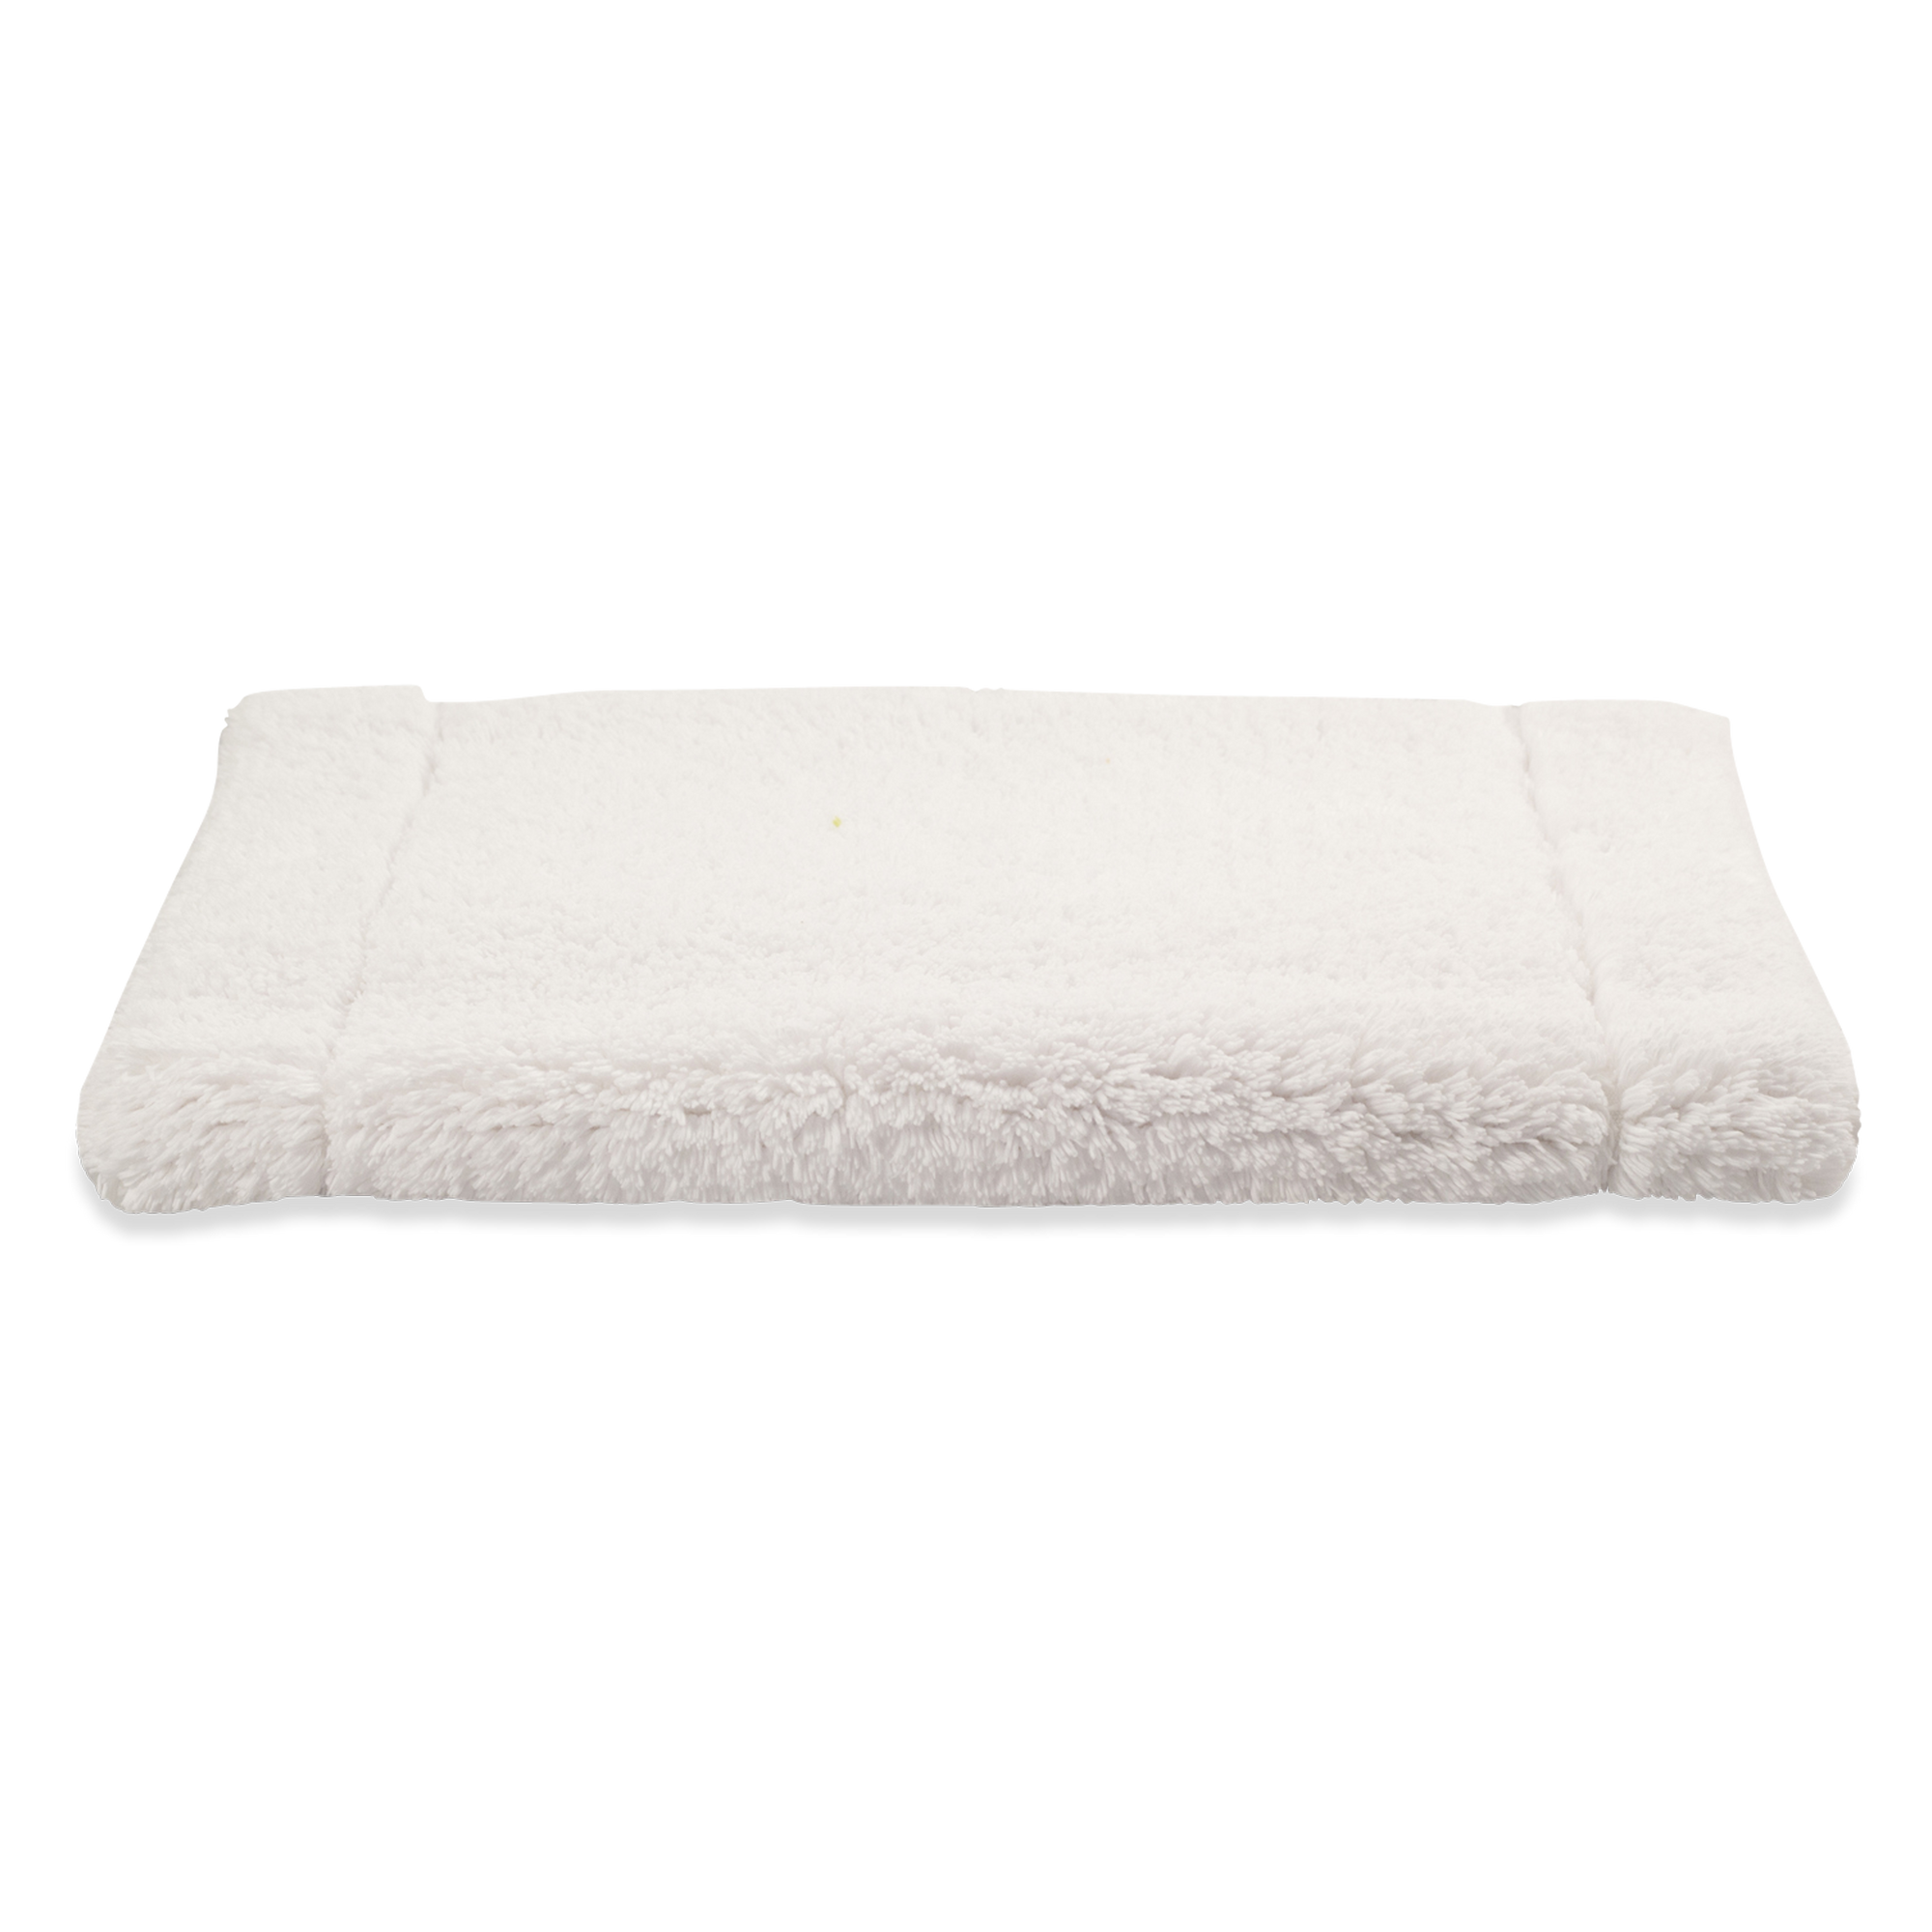 Crafted in a century-old mill in Portugal, this 100% cotton bath rug is fully reversible.